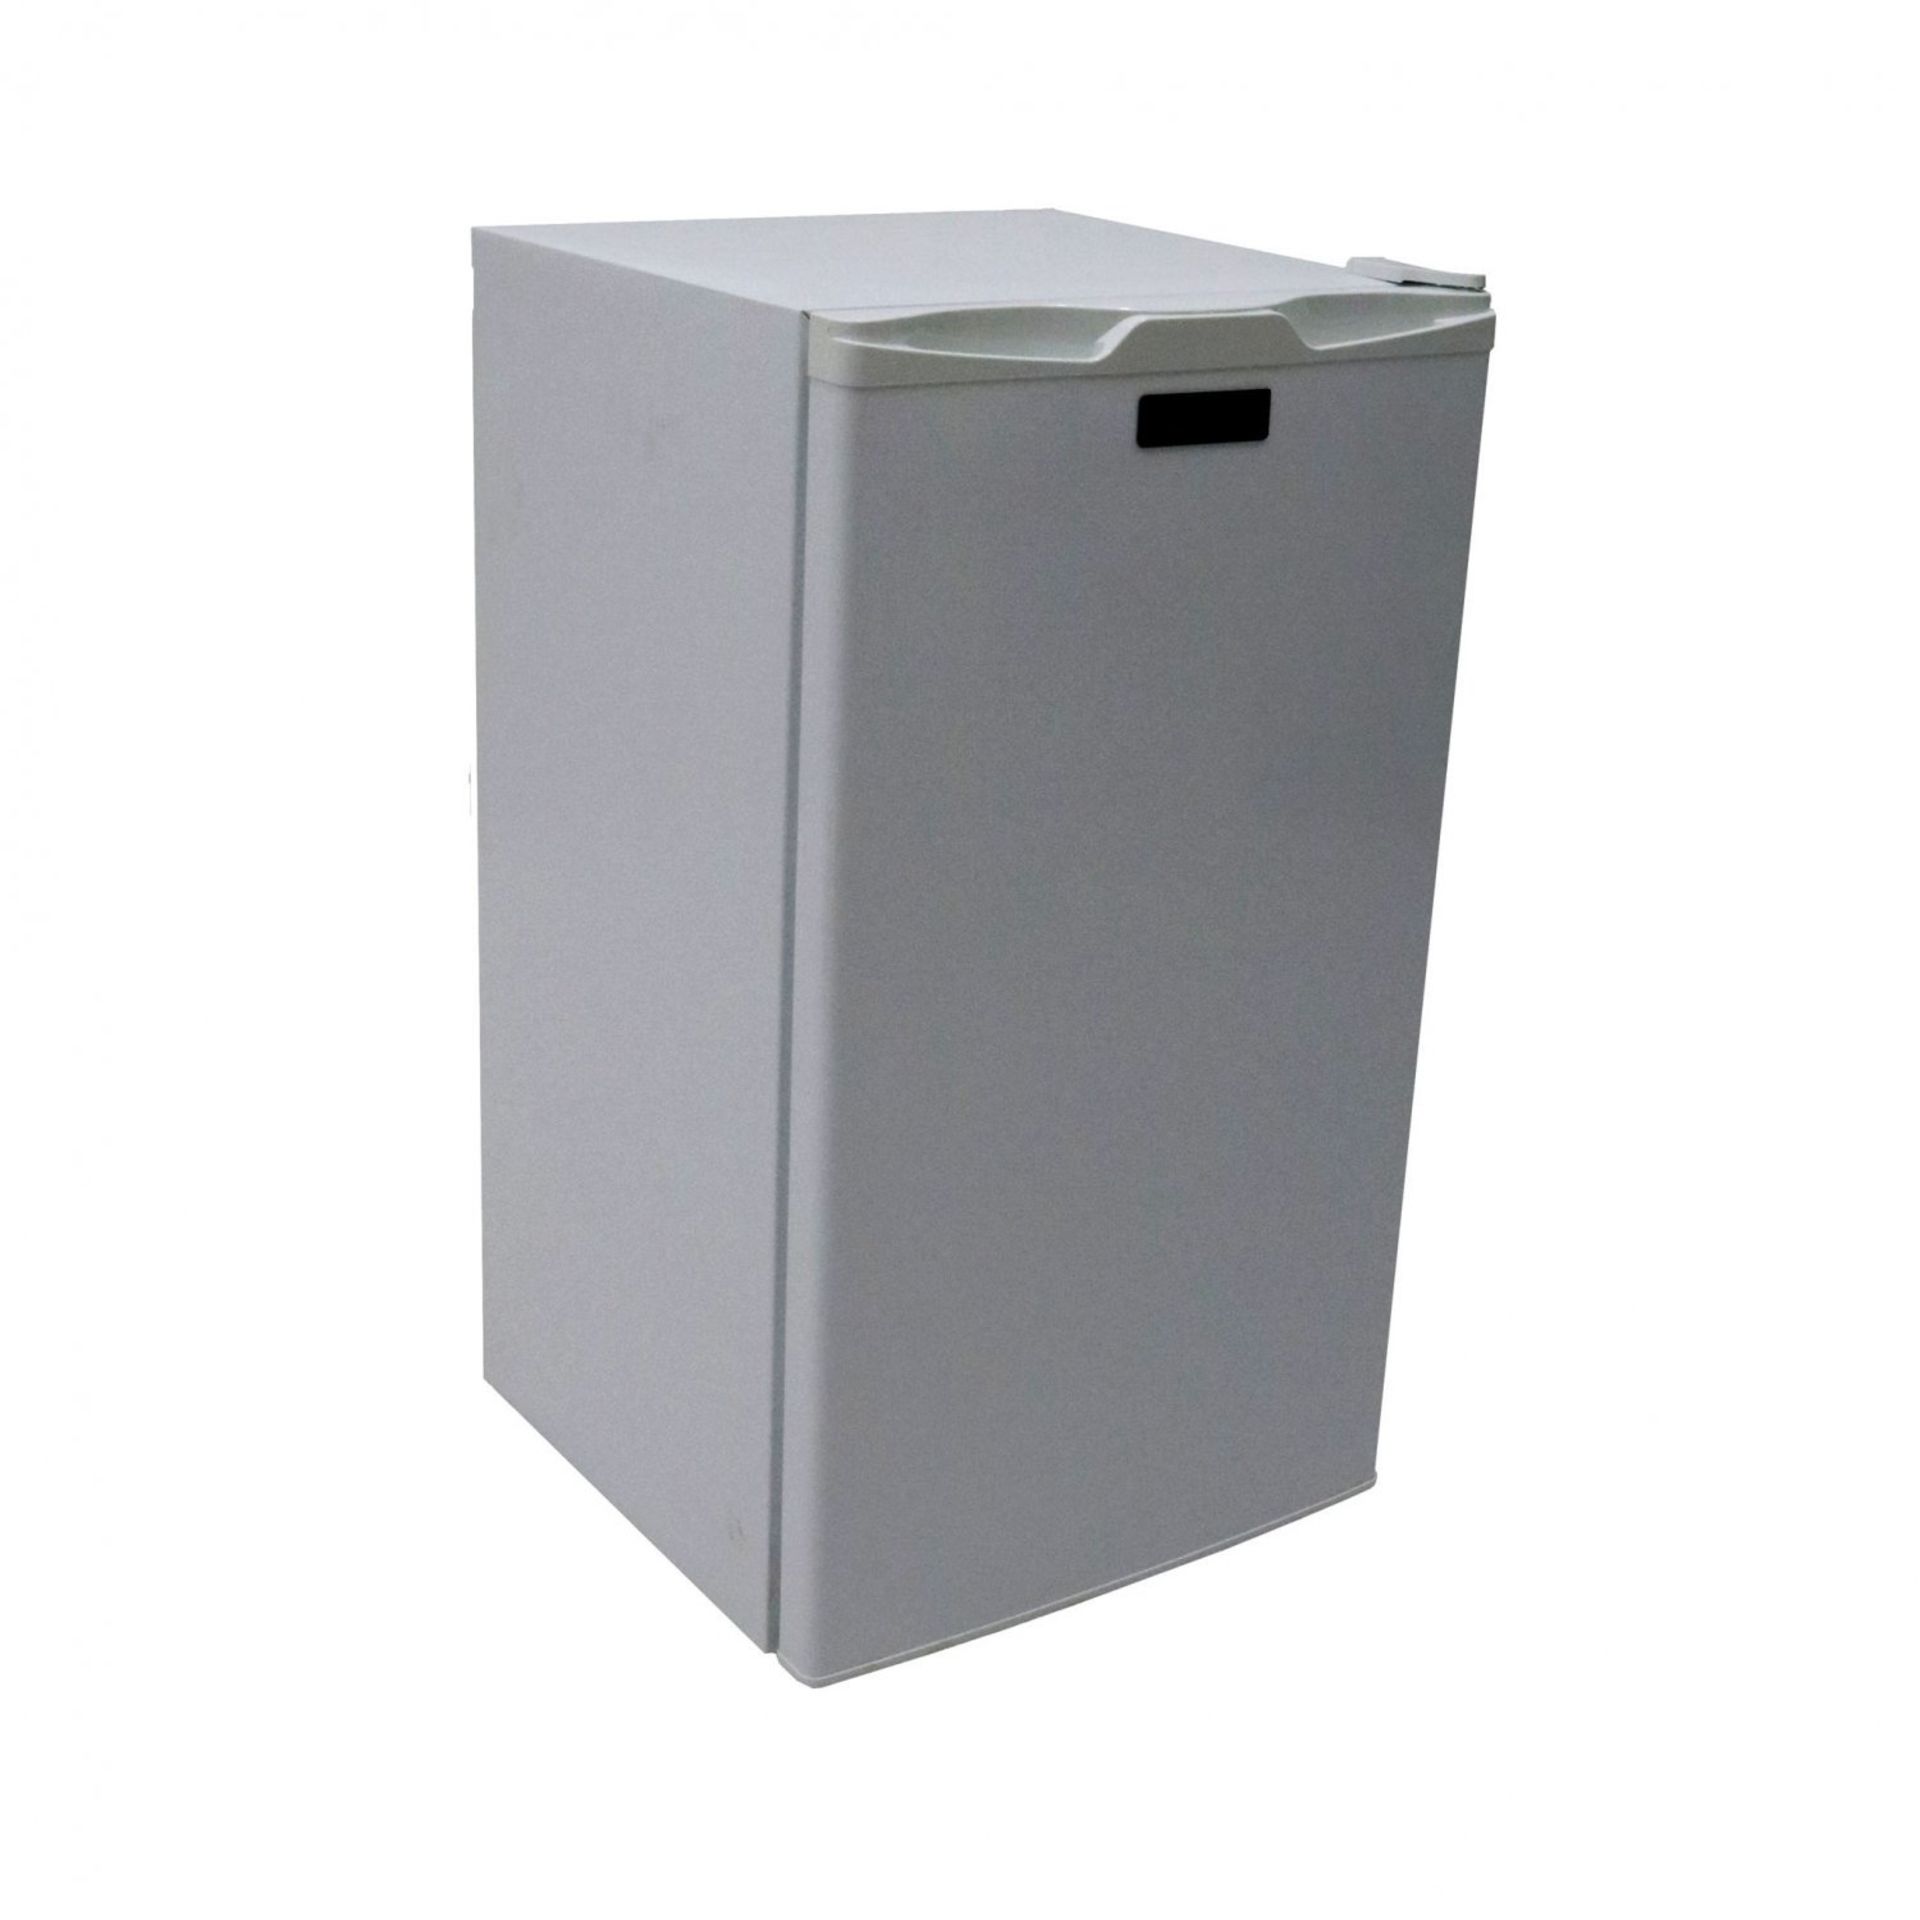 (SK193) The under counter 90L fridge offers a space saving compact design with all the top qual...